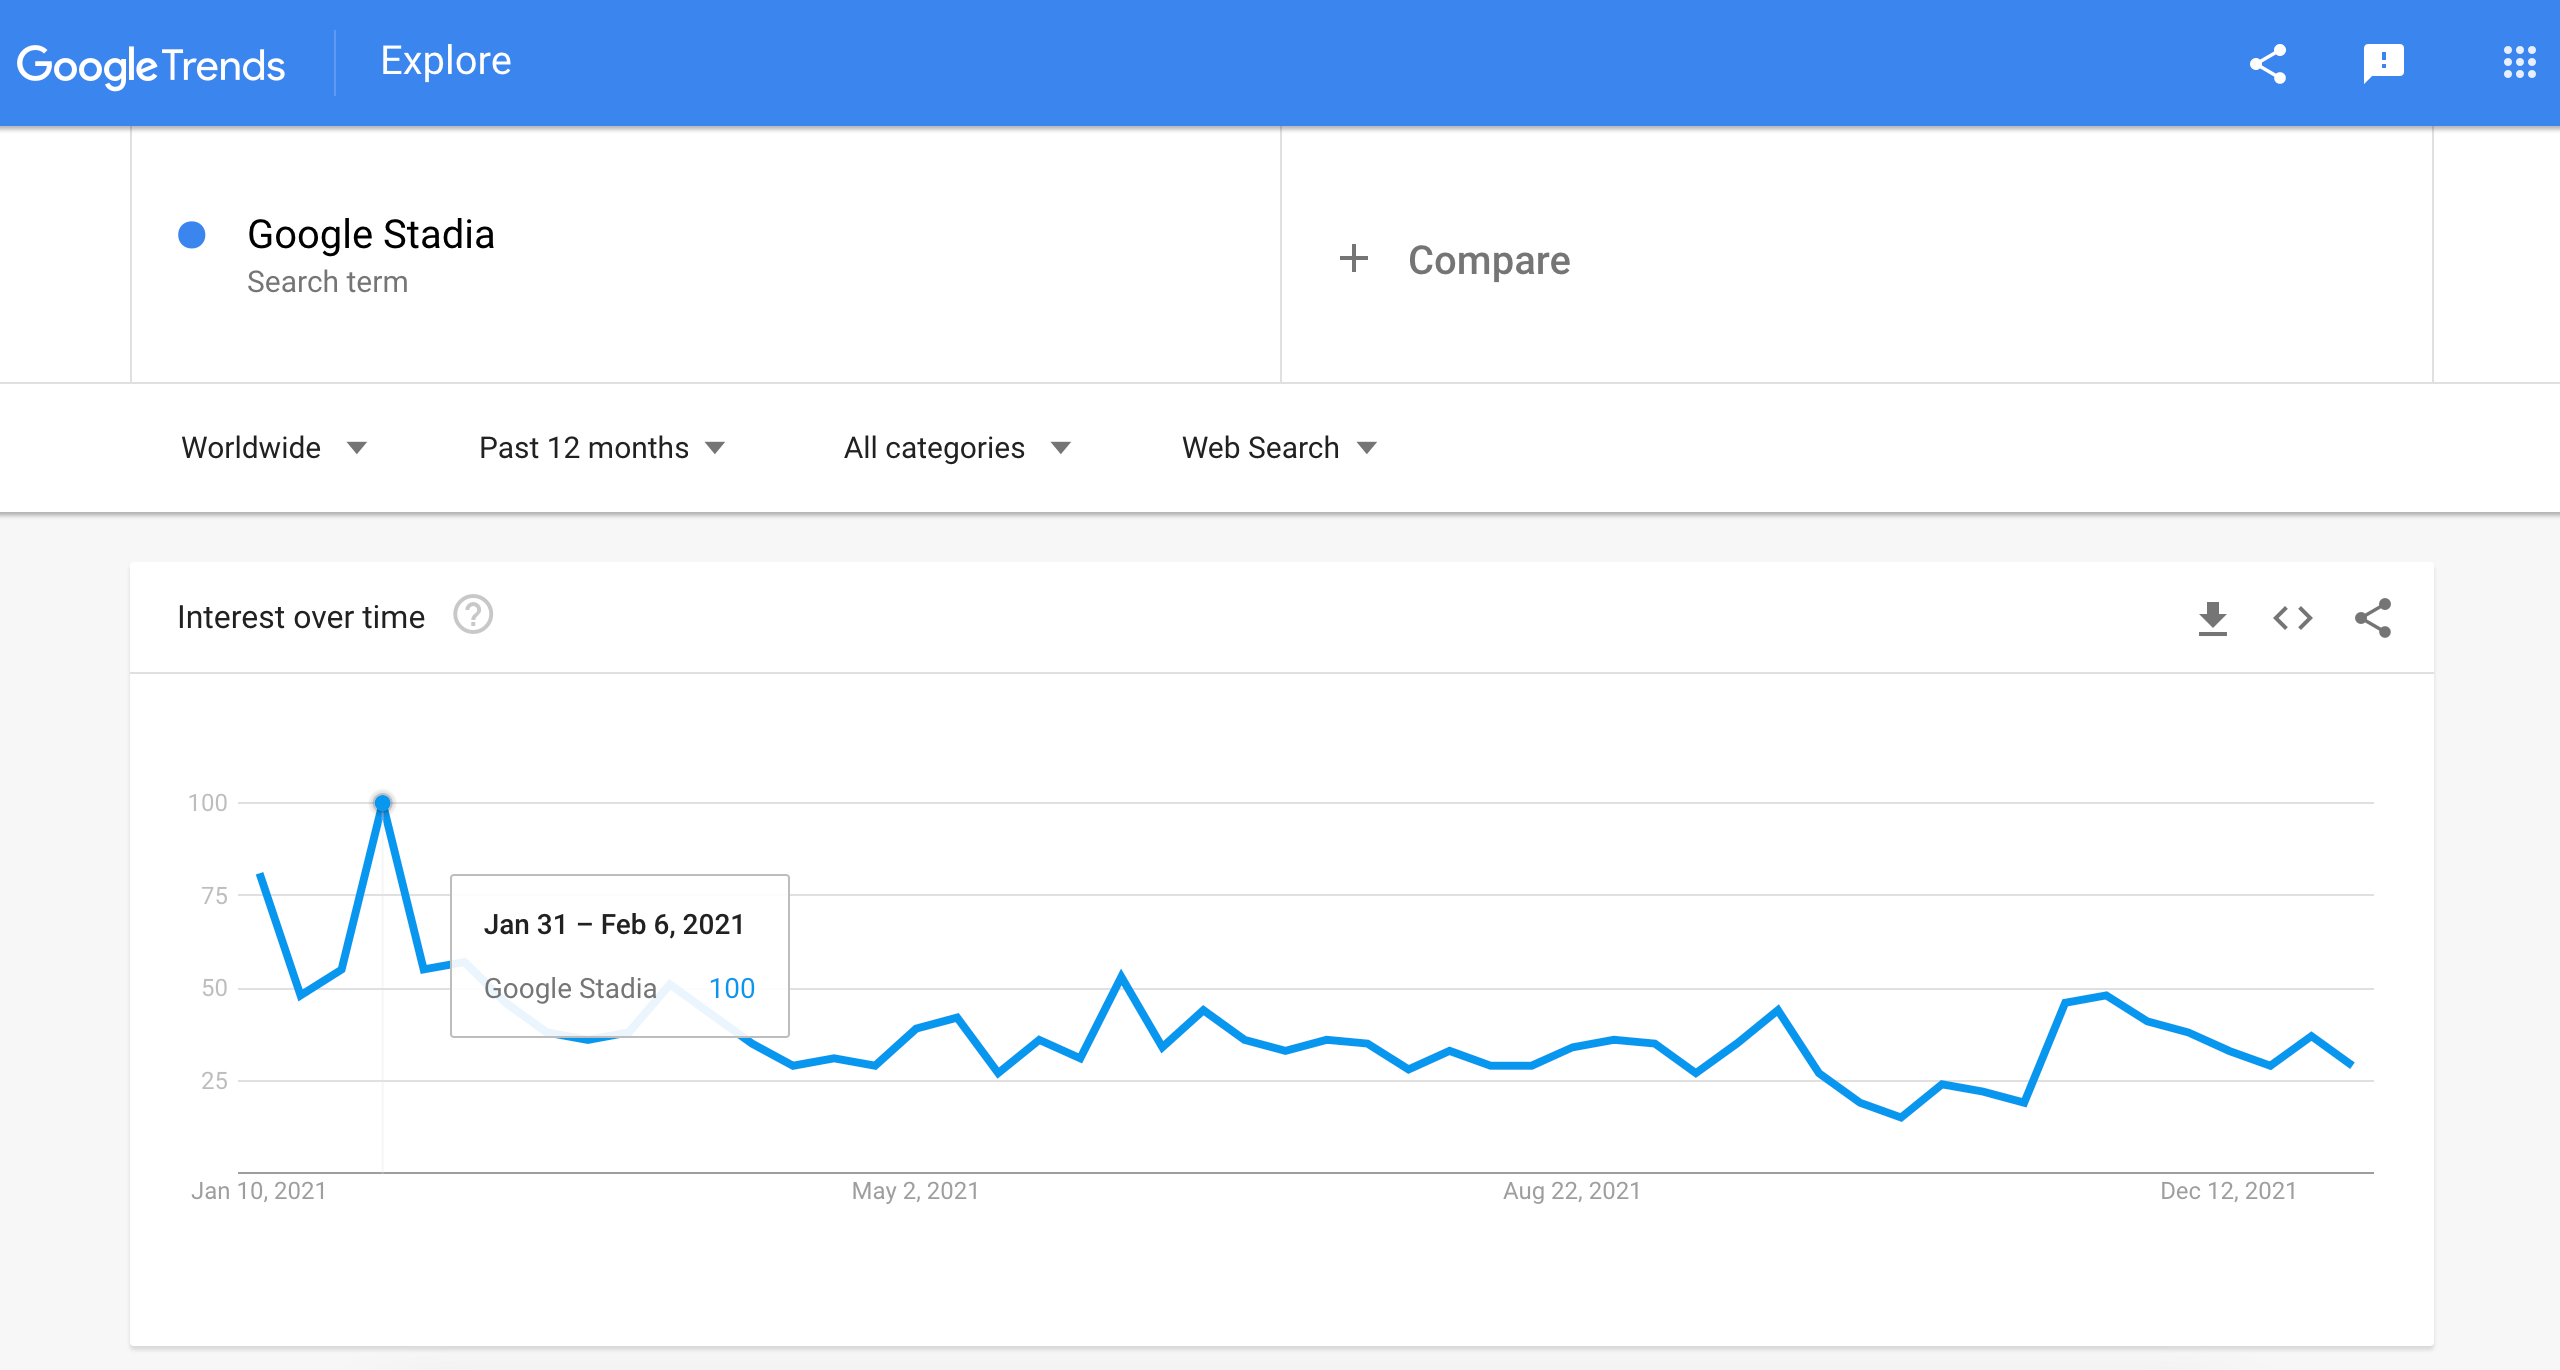 Google Stadia search trends